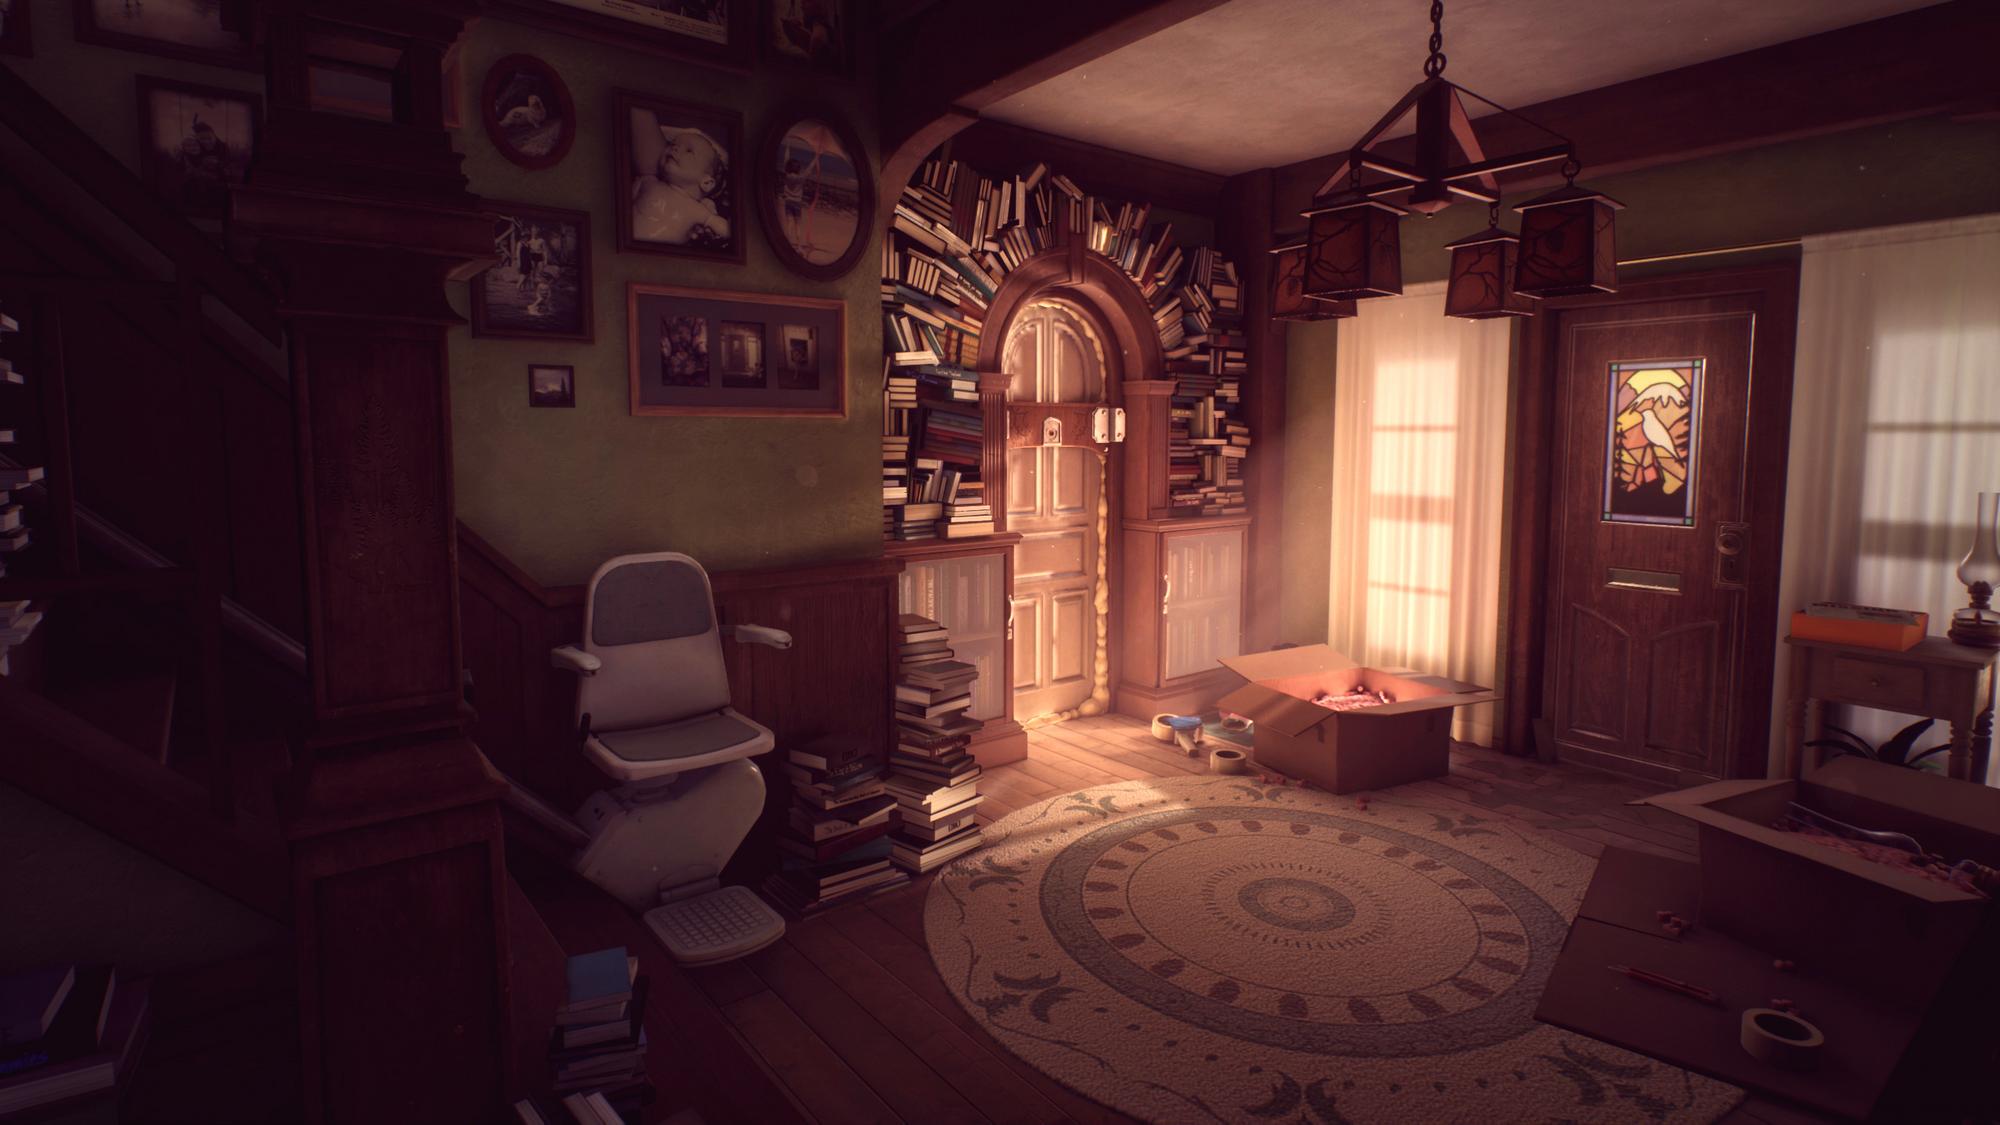 Obrázok z hry What Remains of Edith Finch.